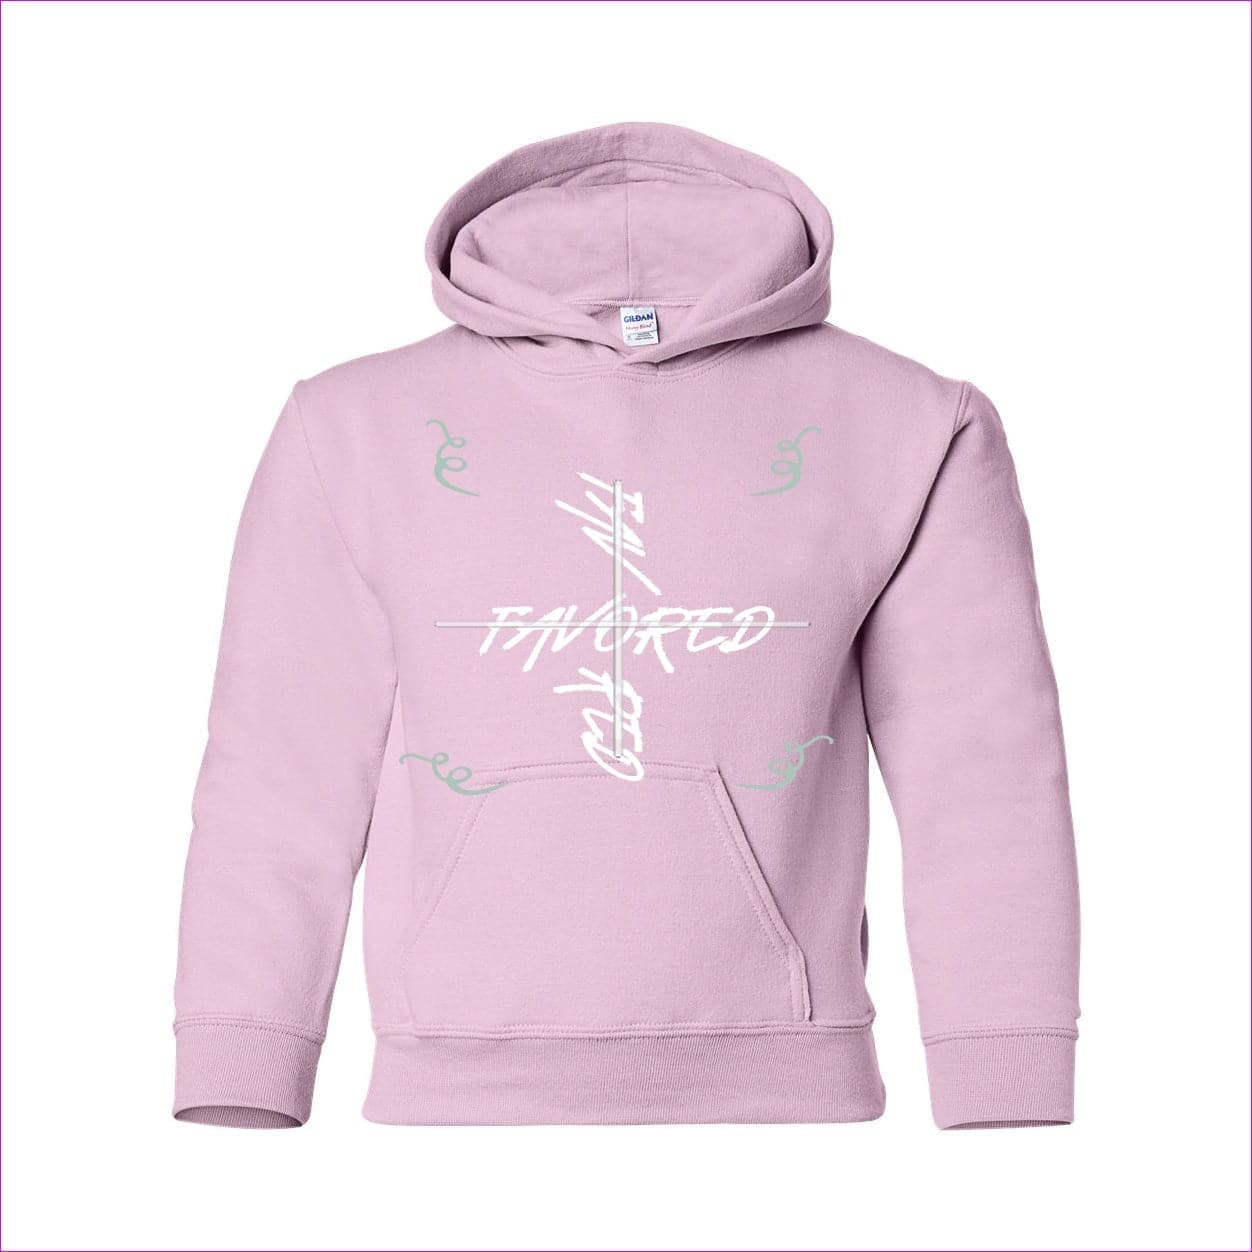 Light Pink Favored 2 Heavy Blend Youth Hooded Sweatshirt - kids hoodies at TFC&H Co.